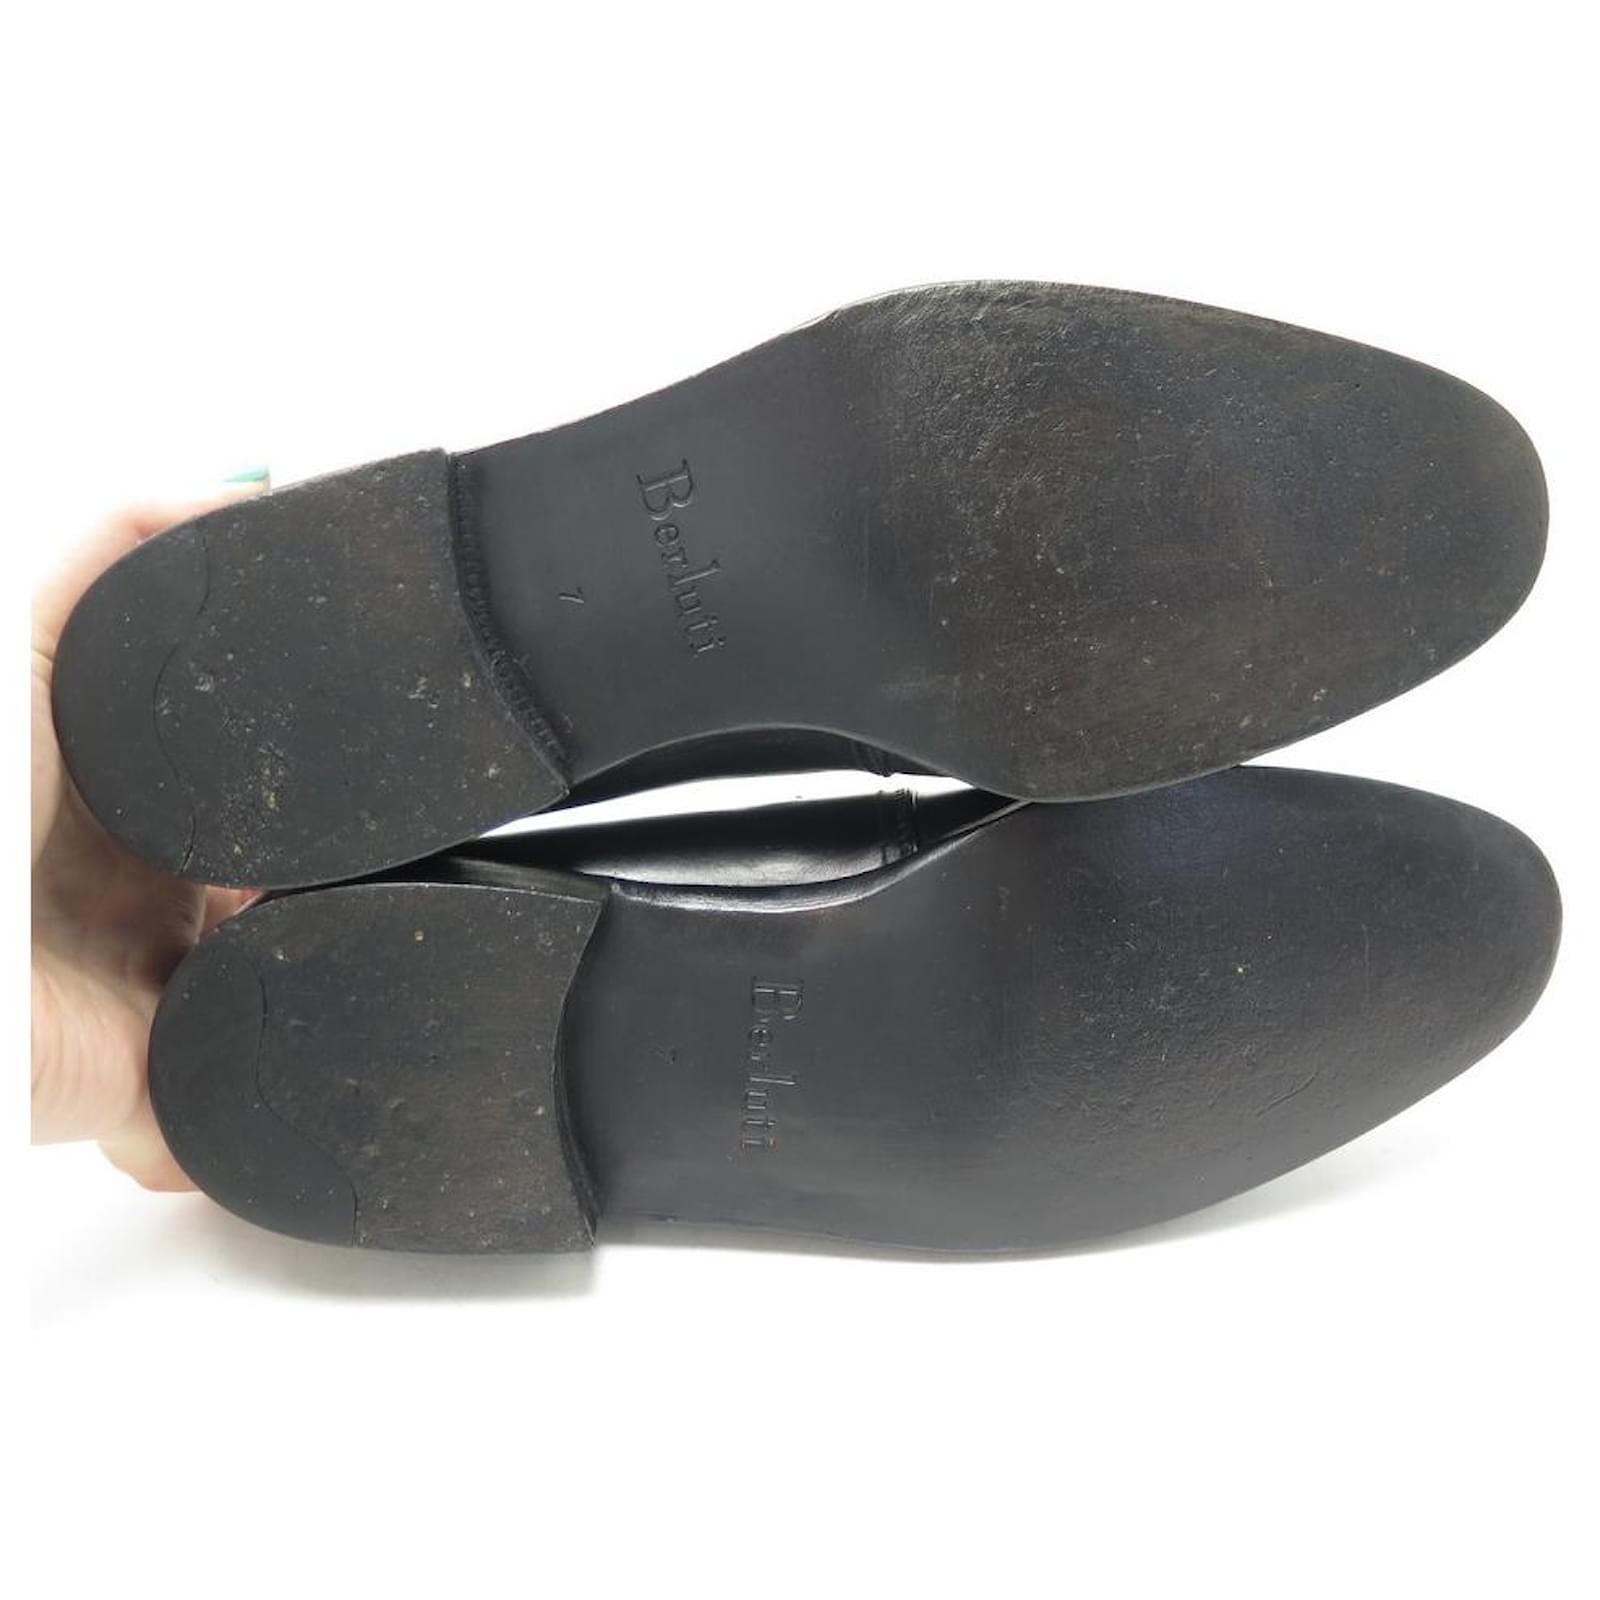 BERLUTI SHOES BUCKLE LOAFERS 7 41 BLACK LEATHER + STAINLESS STEEL SHOES  ref.340770 - Joli Closet